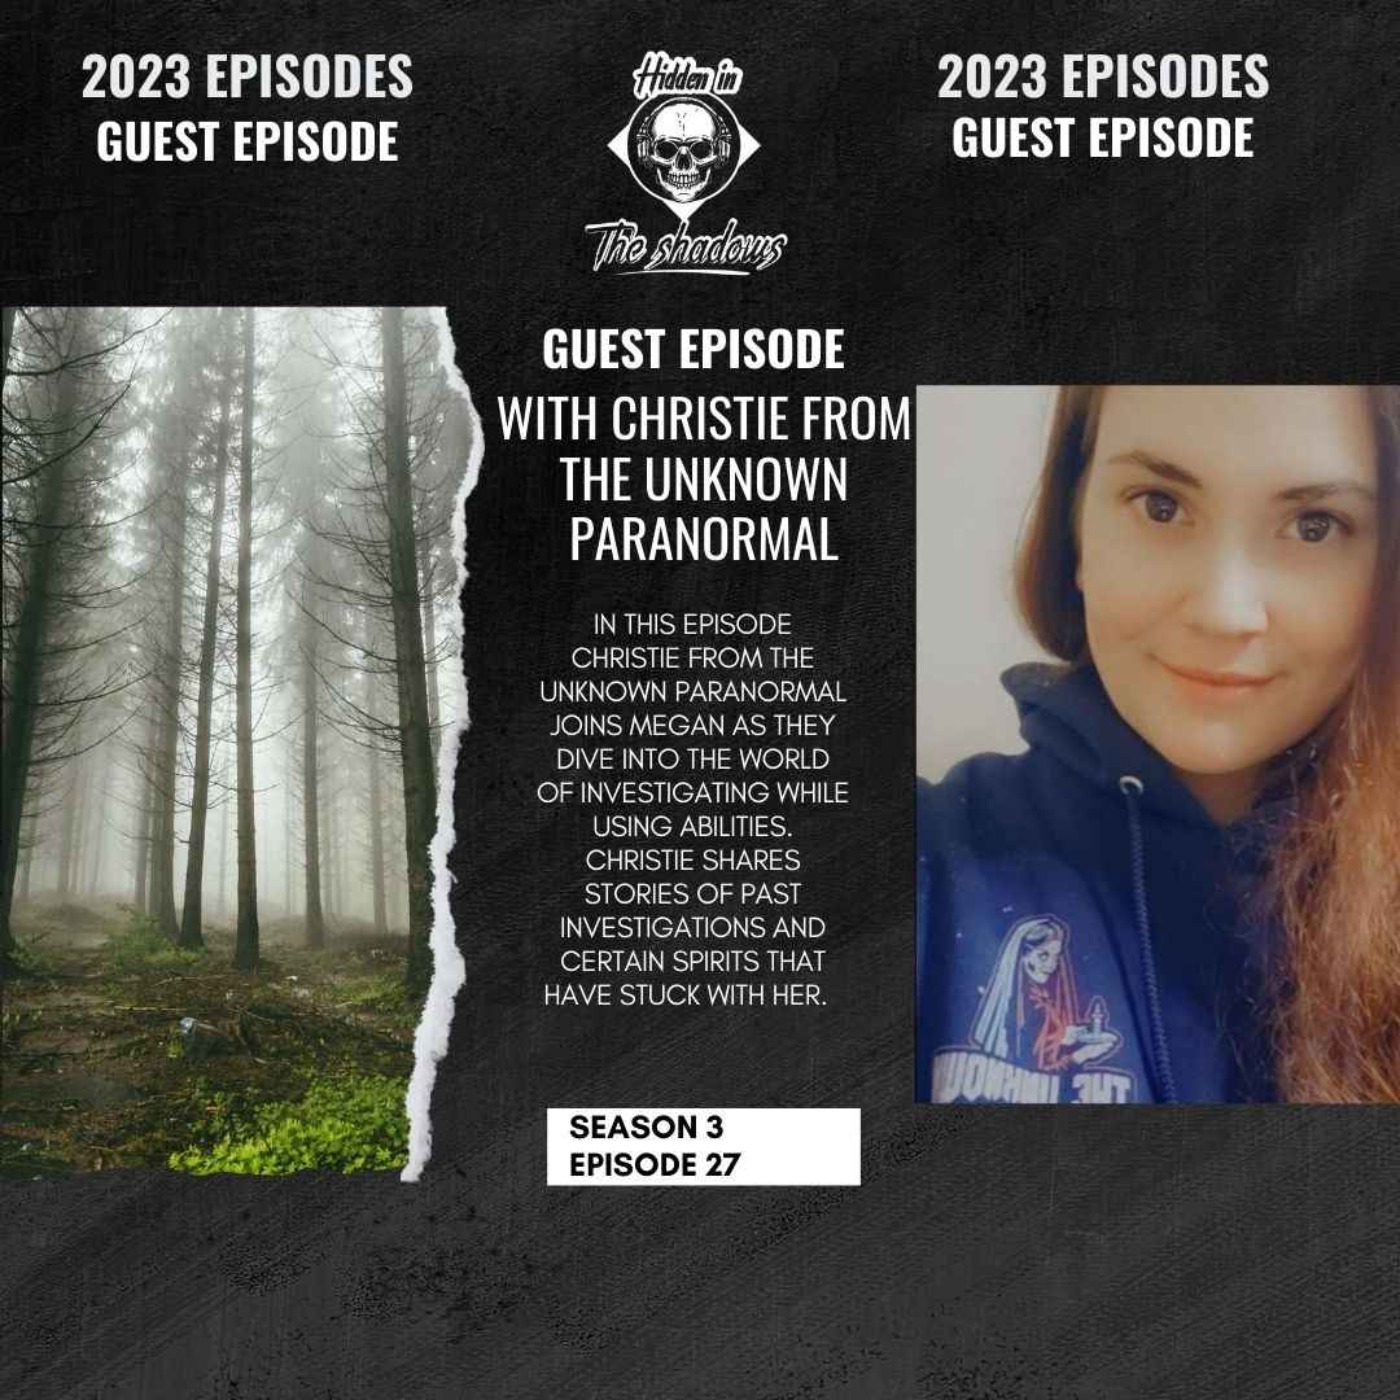 Guest Episode With Christie From The Unknown Paranormal